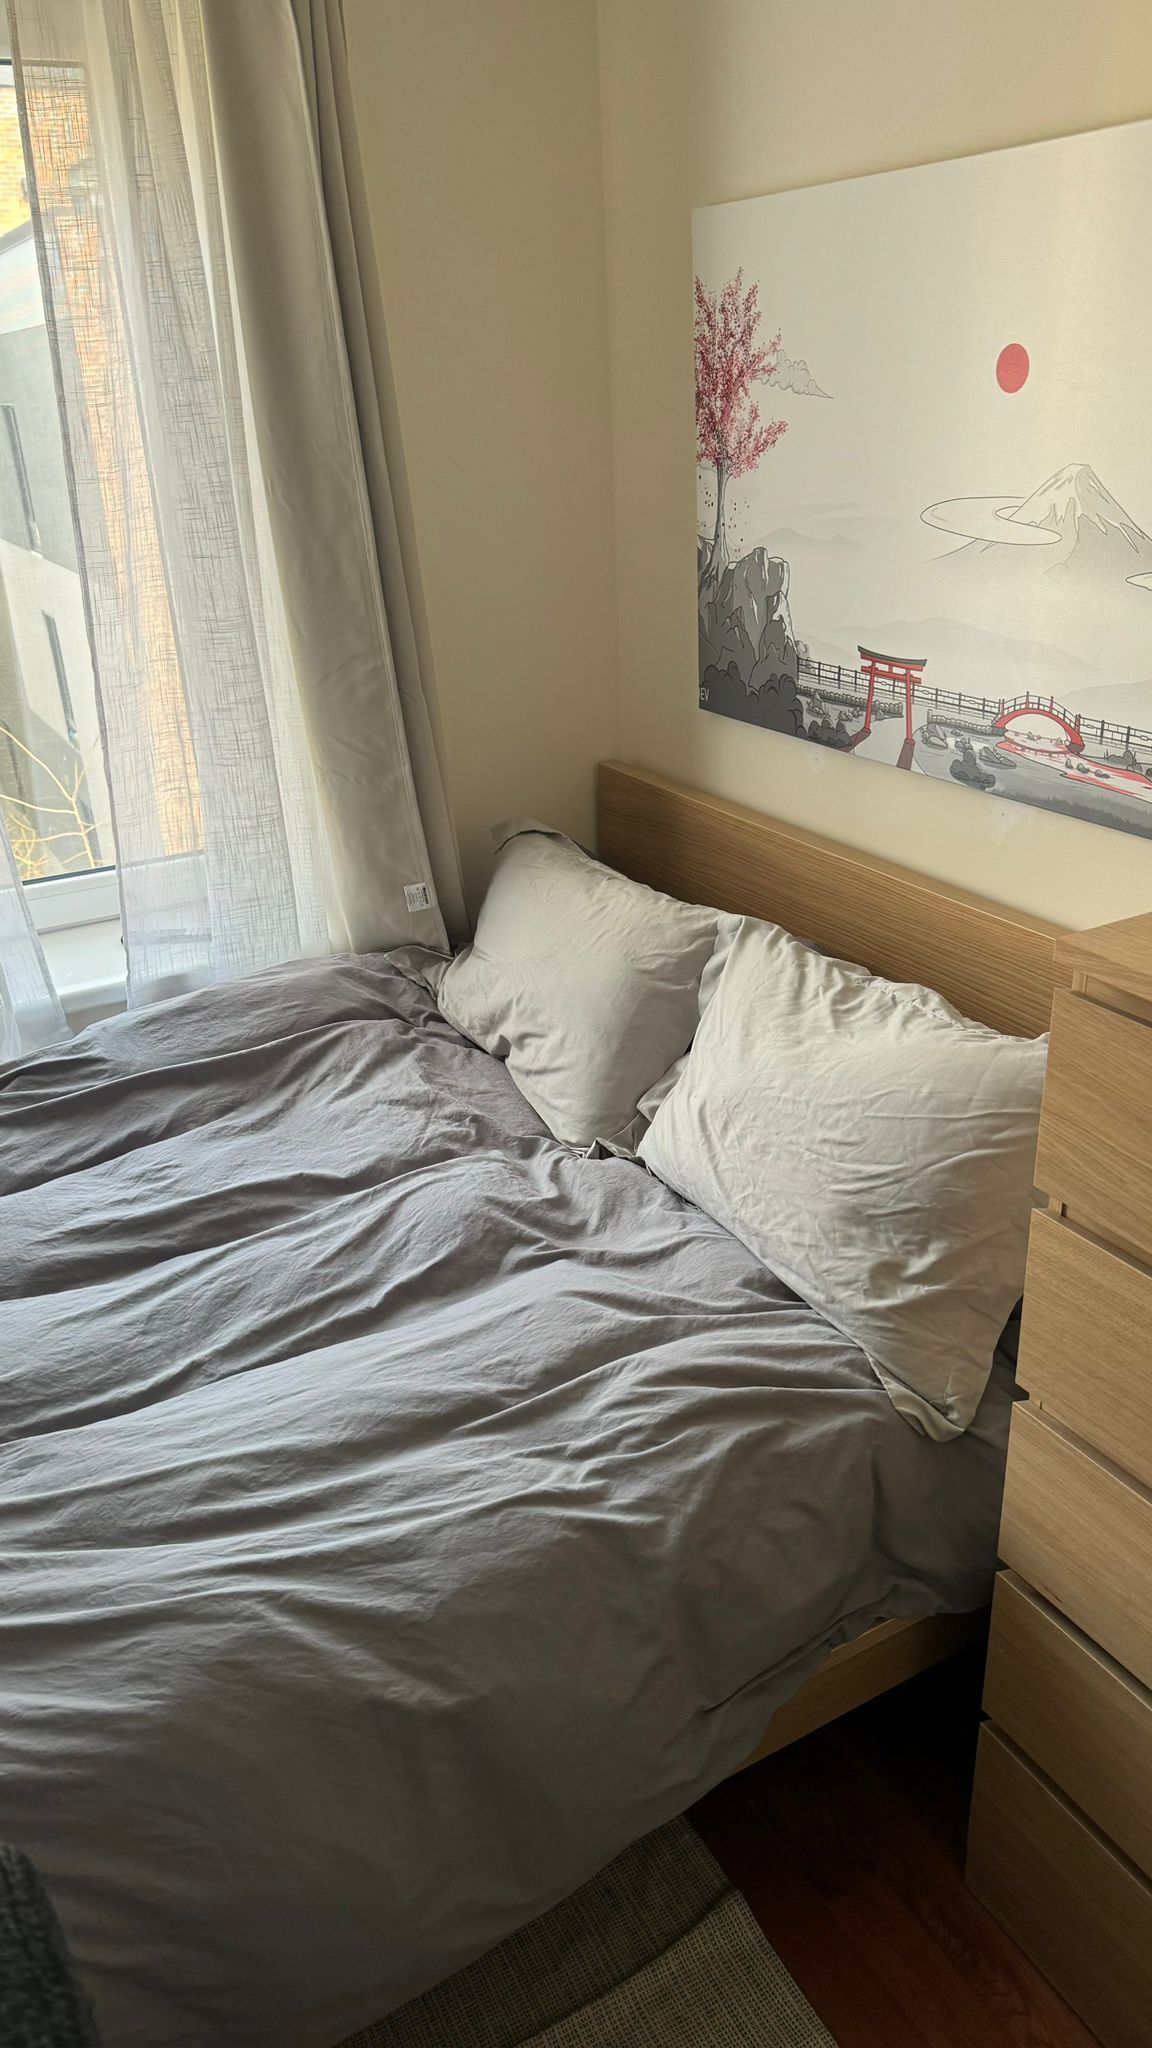 IKEA Full MALM Bed frame, white stained oak